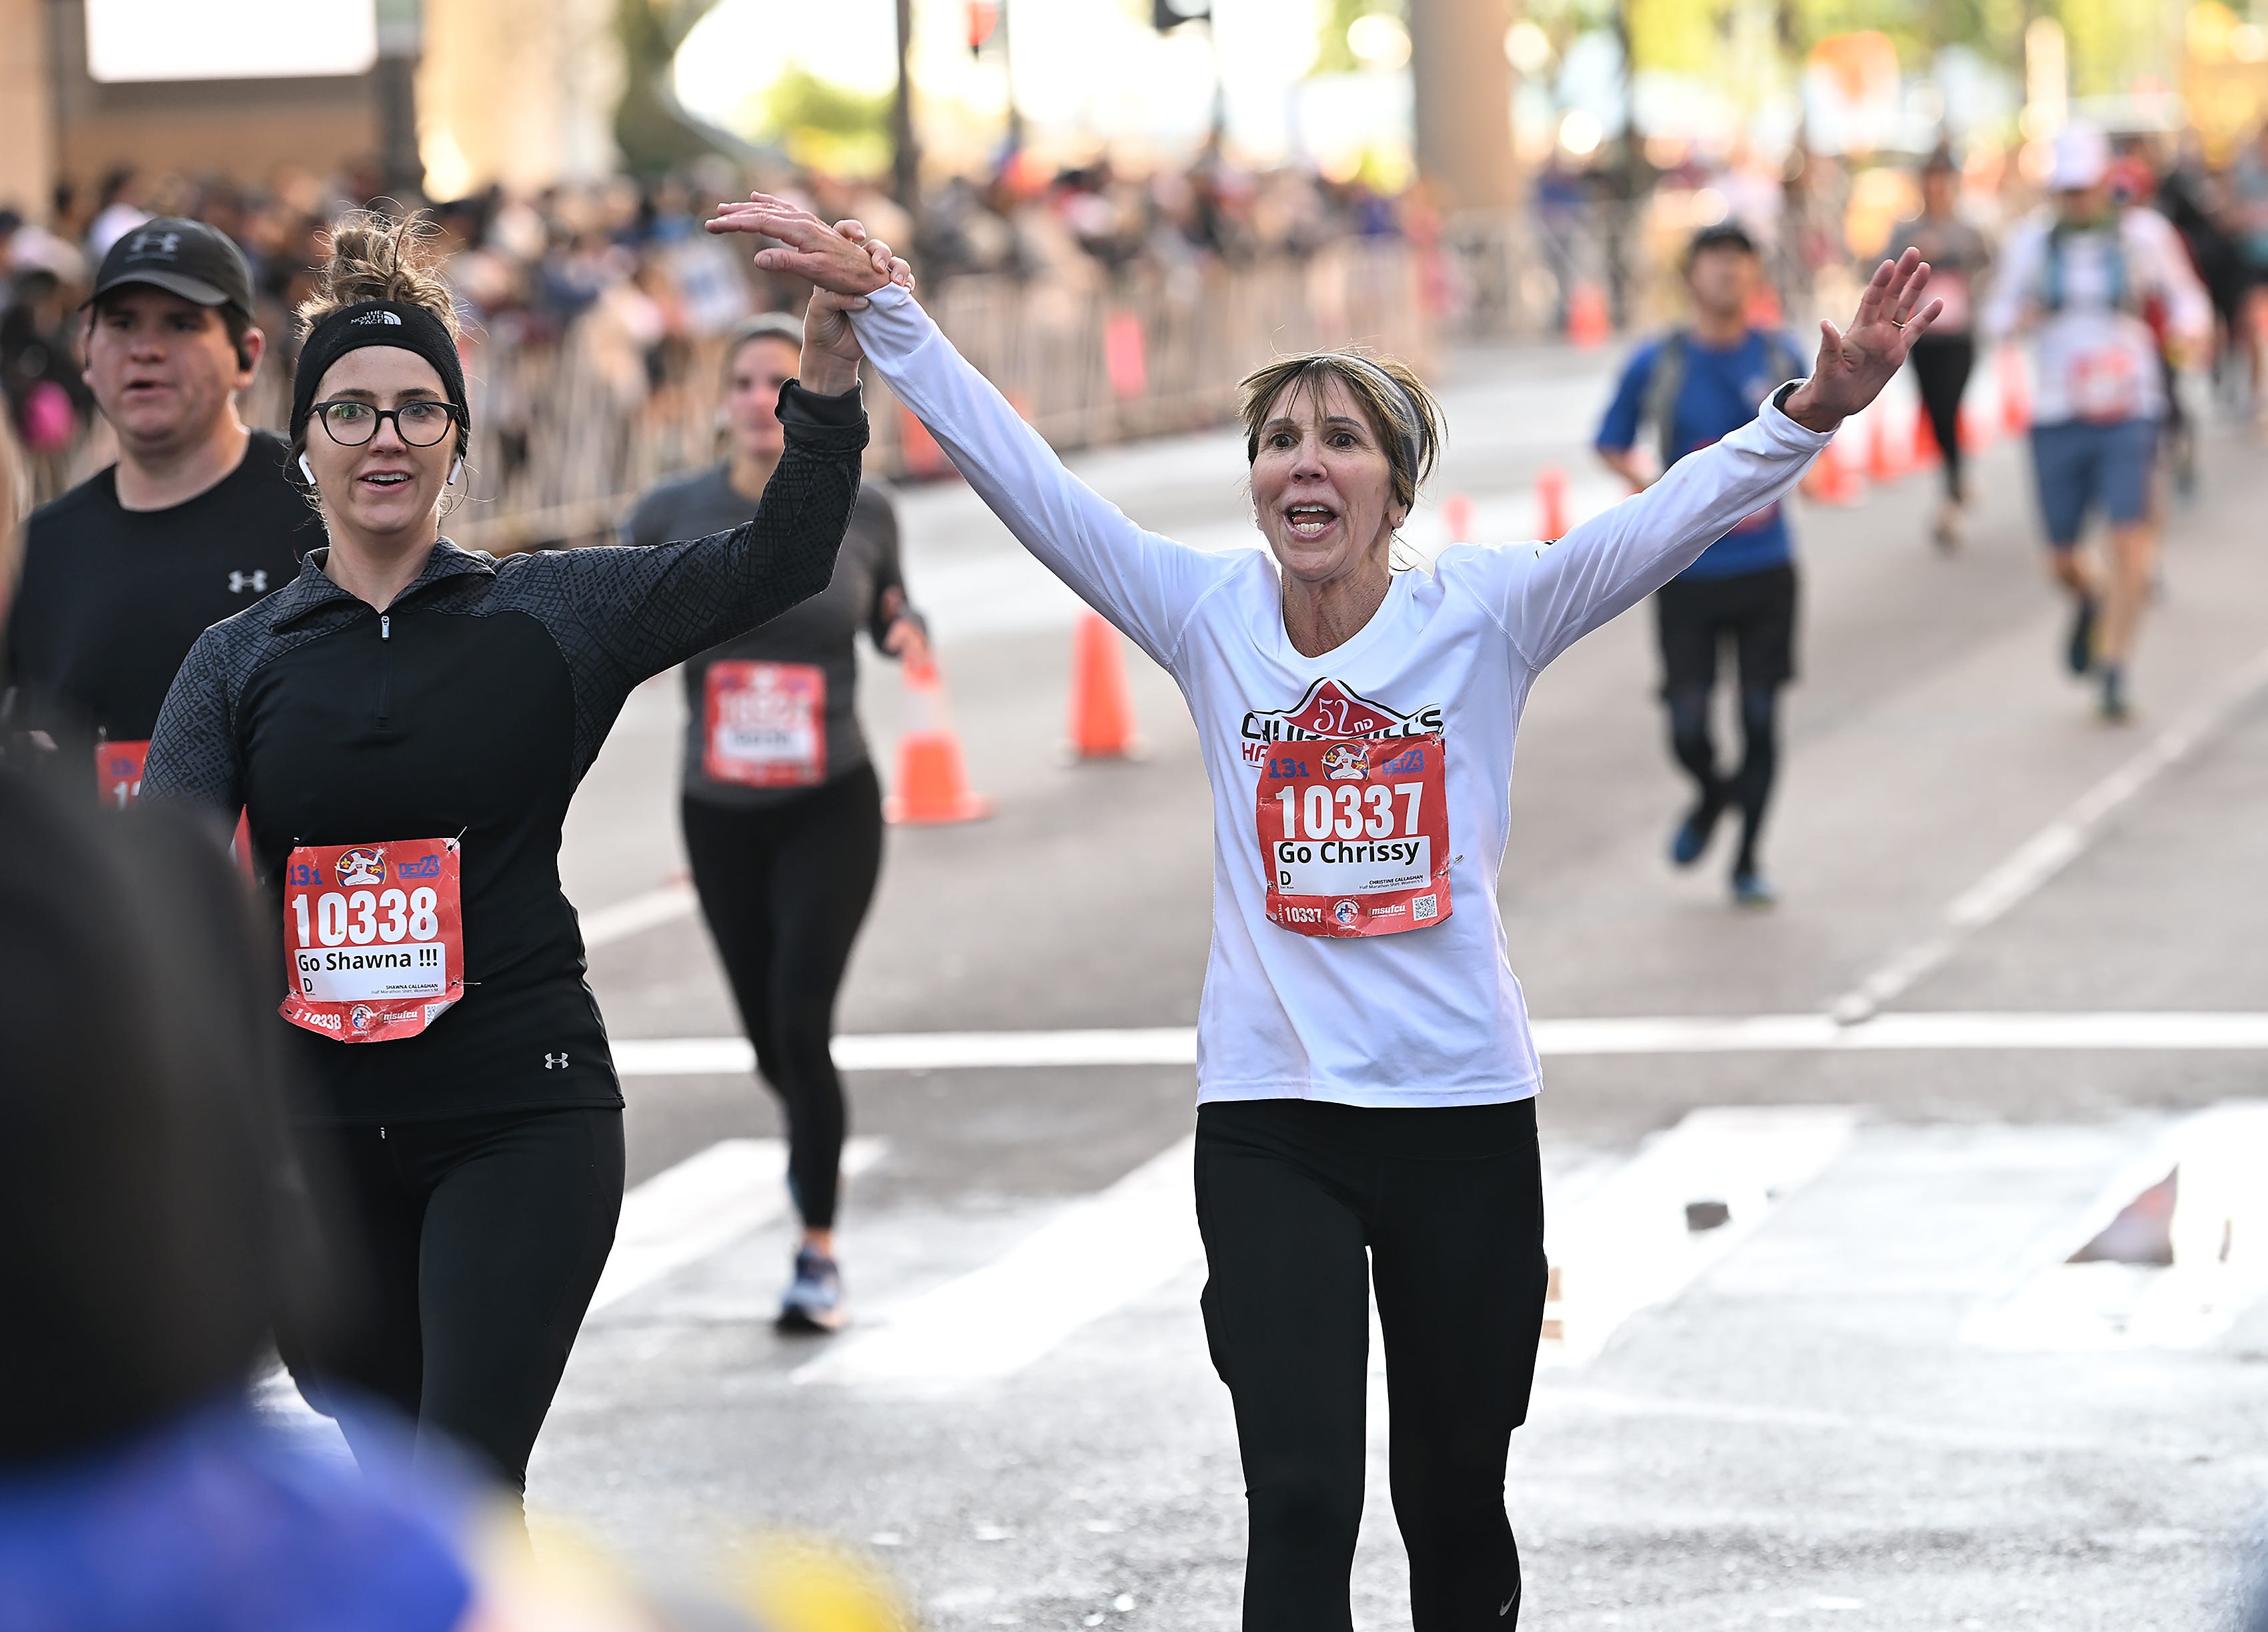 From left, Shawna Callighan and Christine Callighan both of Toledo finish the half marathon at the Detroit Free Press Marathon in Detroit on Oct. 15, 2023.